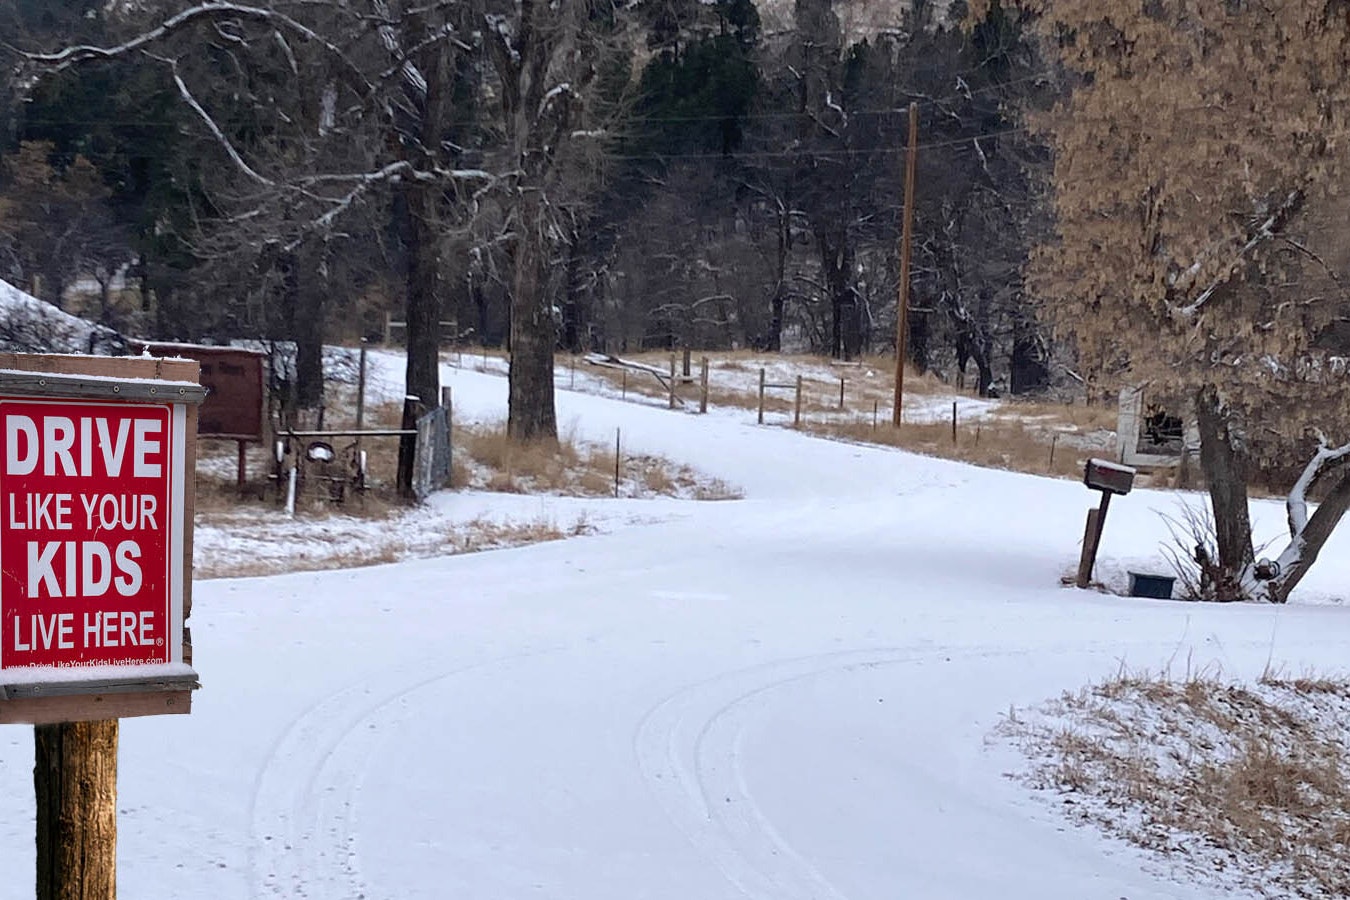 The roughly 12-mile Barlow Canyon Road is one of several Crook County roads on which some residents would like to see the state-mandated 55 mph speed limit lowered.